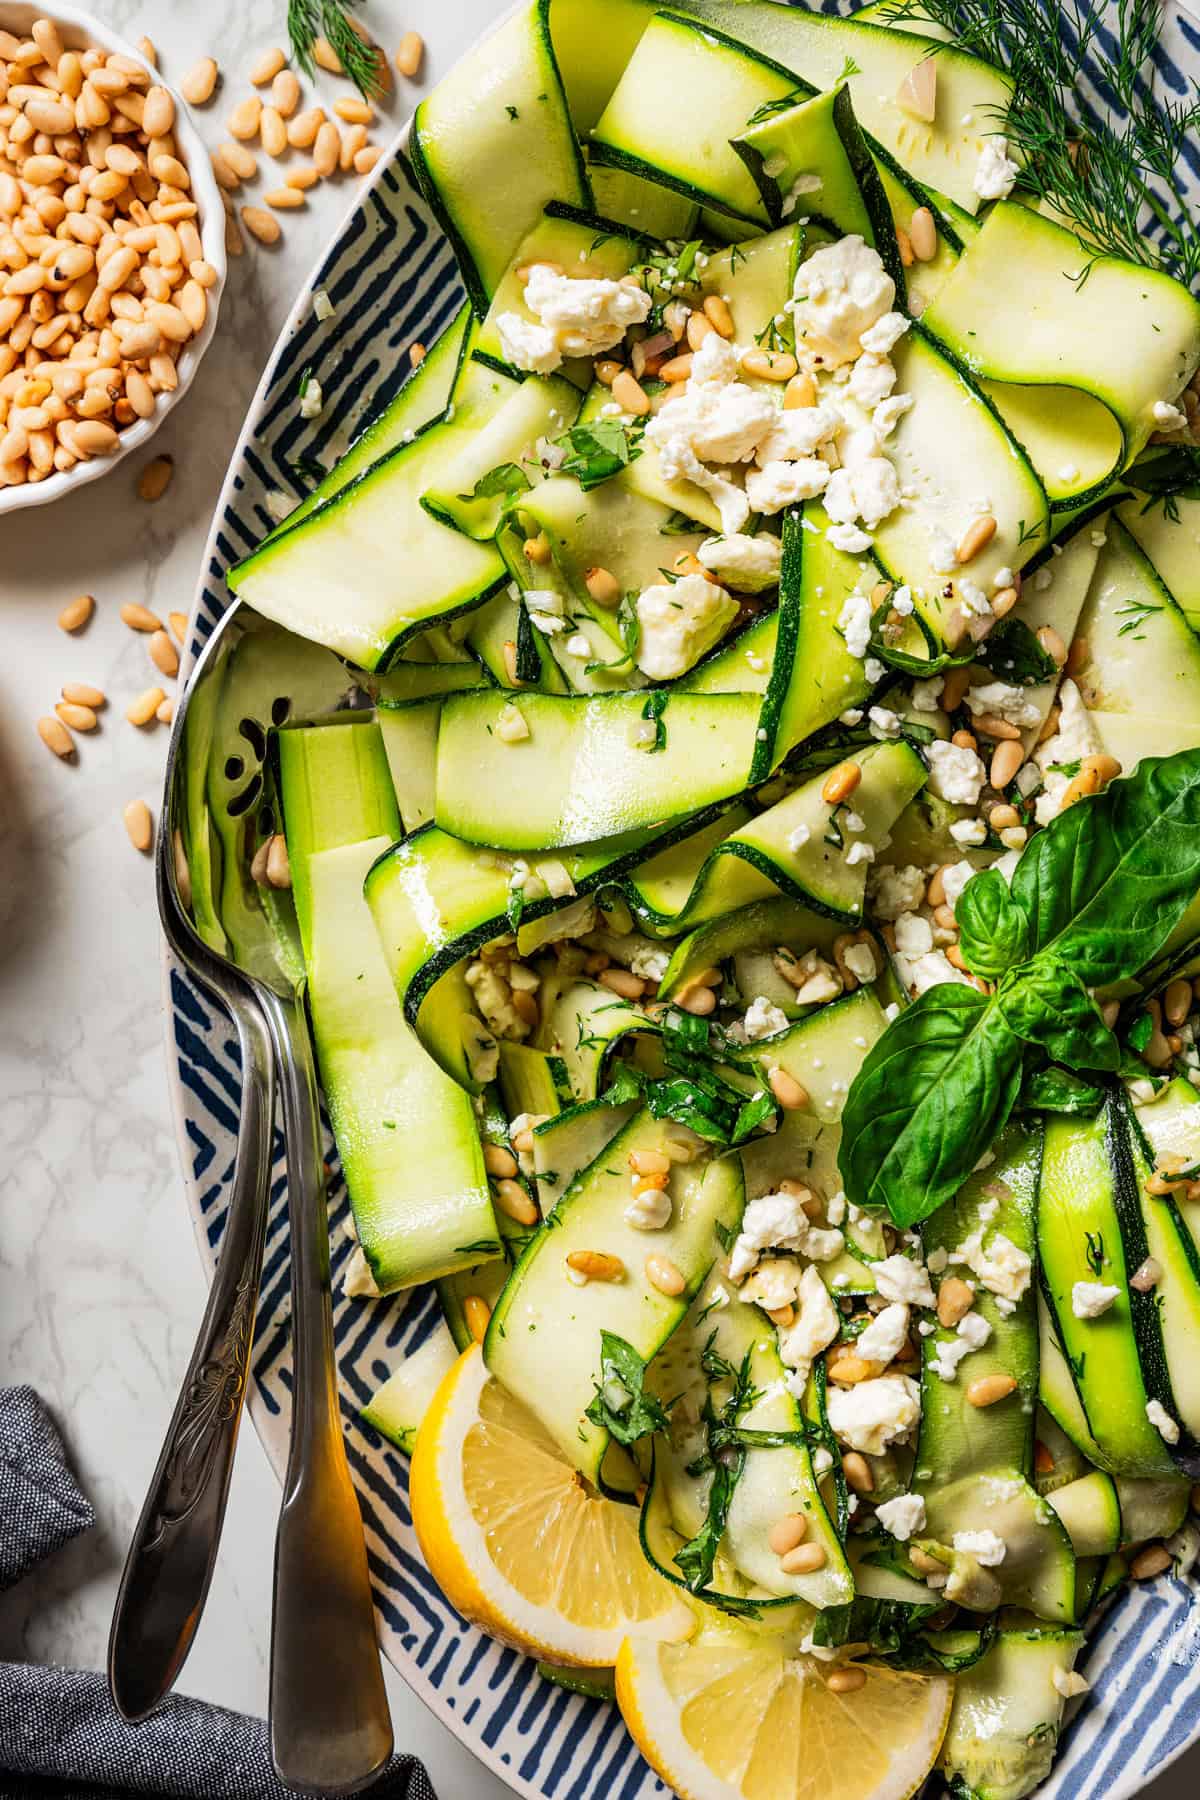 A plate of thinly sliced zucchini topped with pine nuts and crumbles of cheese, and a pair of salad tongs are set on the plate.